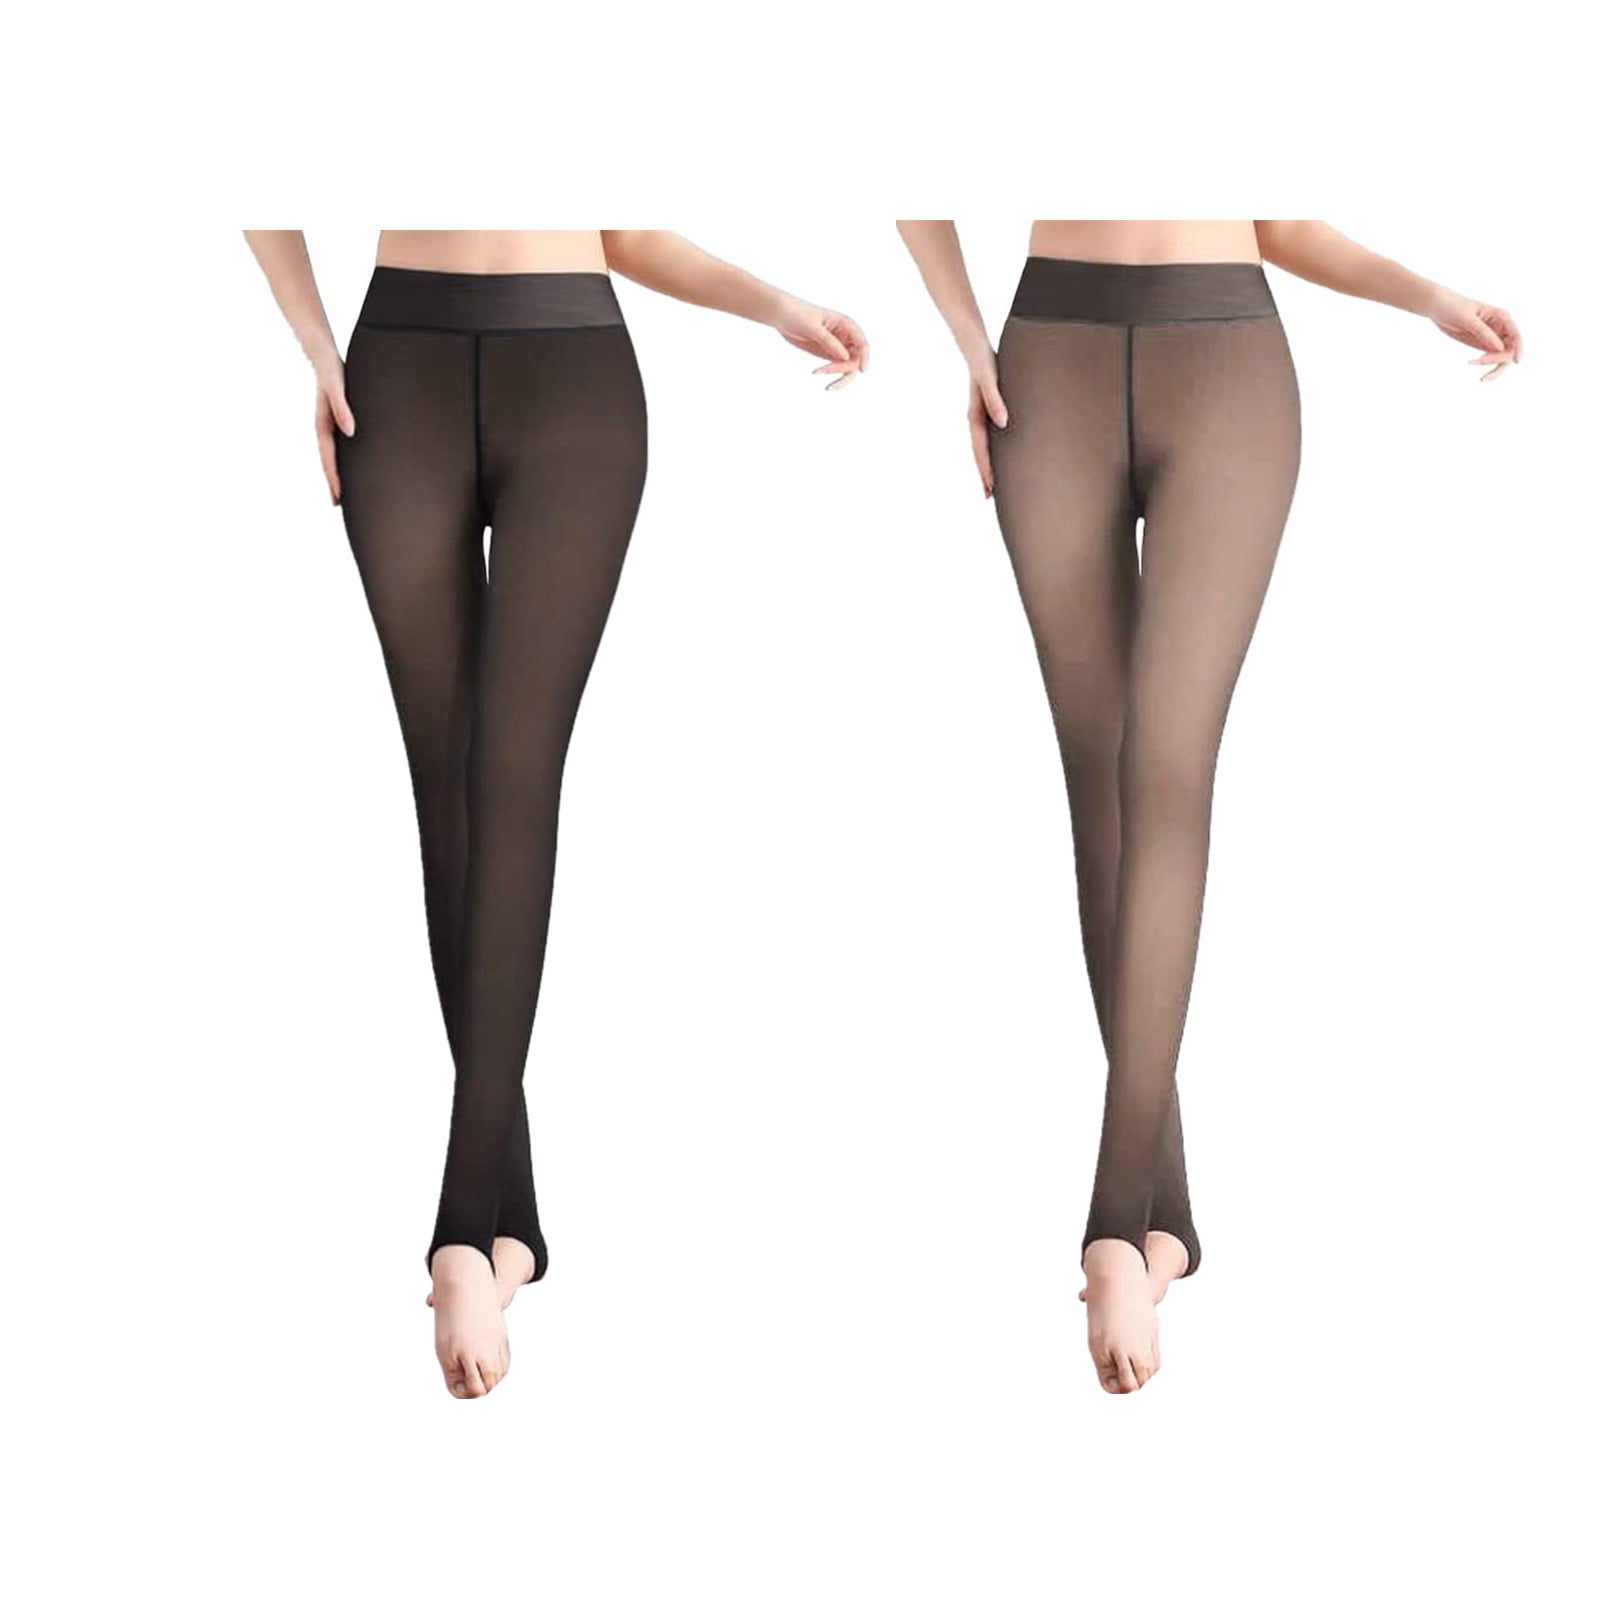 Buy Classy wrap Women Fleece Lined Tights Fake Translucent Thermal Leggings  Winter Sheer Warm Pantyhose Footless Tights For Women Winter Wear Color  Black - Full Foot (Free Size) at